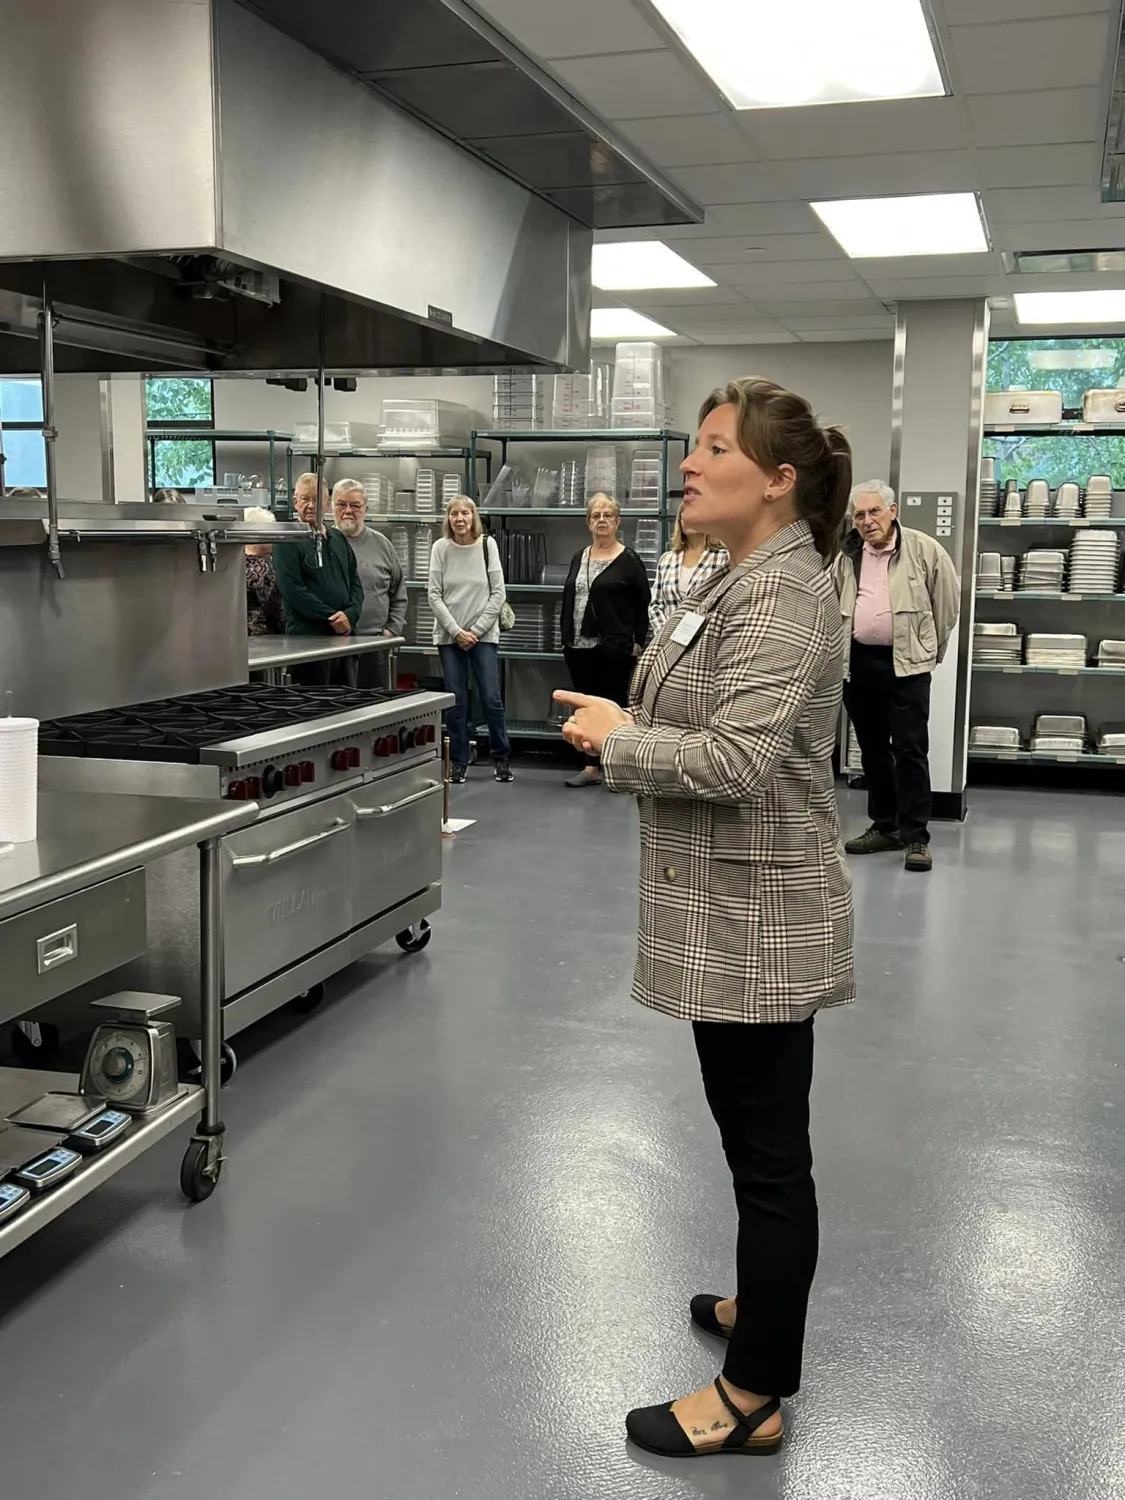 Loganne Glendenning, associate professor in Hospitality Management, giving a tour of the department's new culinary facilities in the Northern Center.